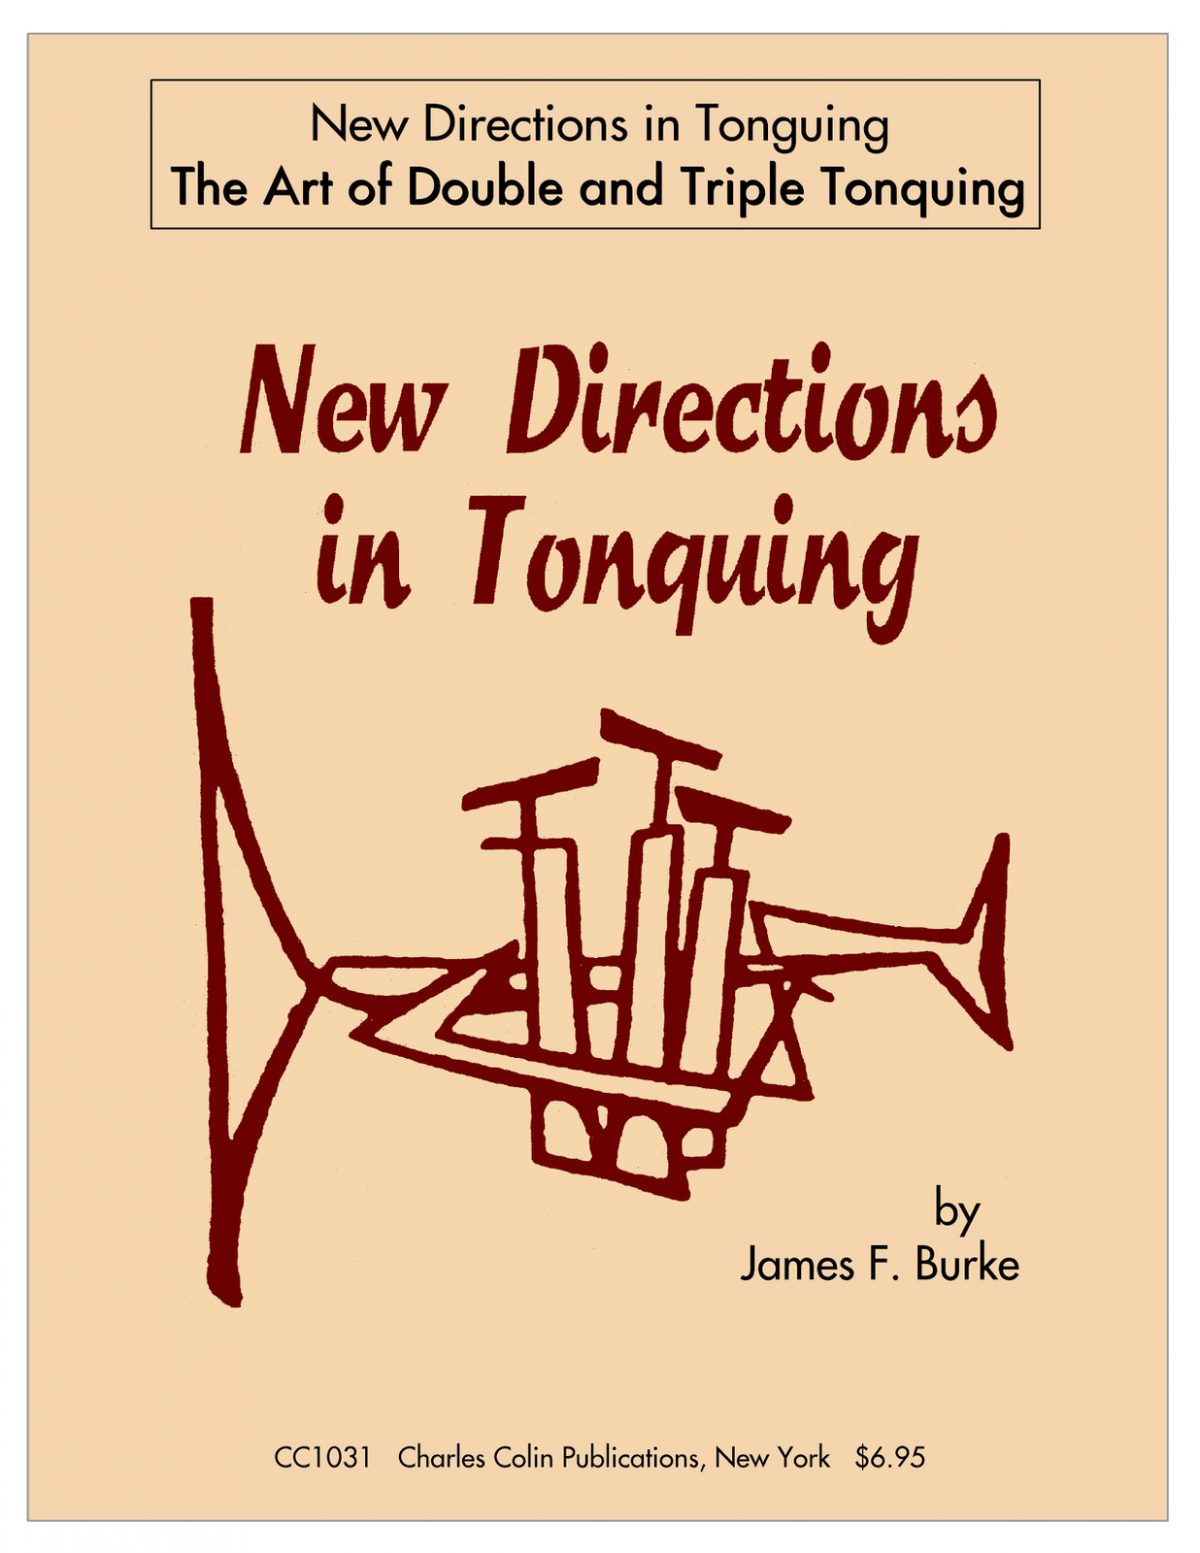 New Directions in Tonguing